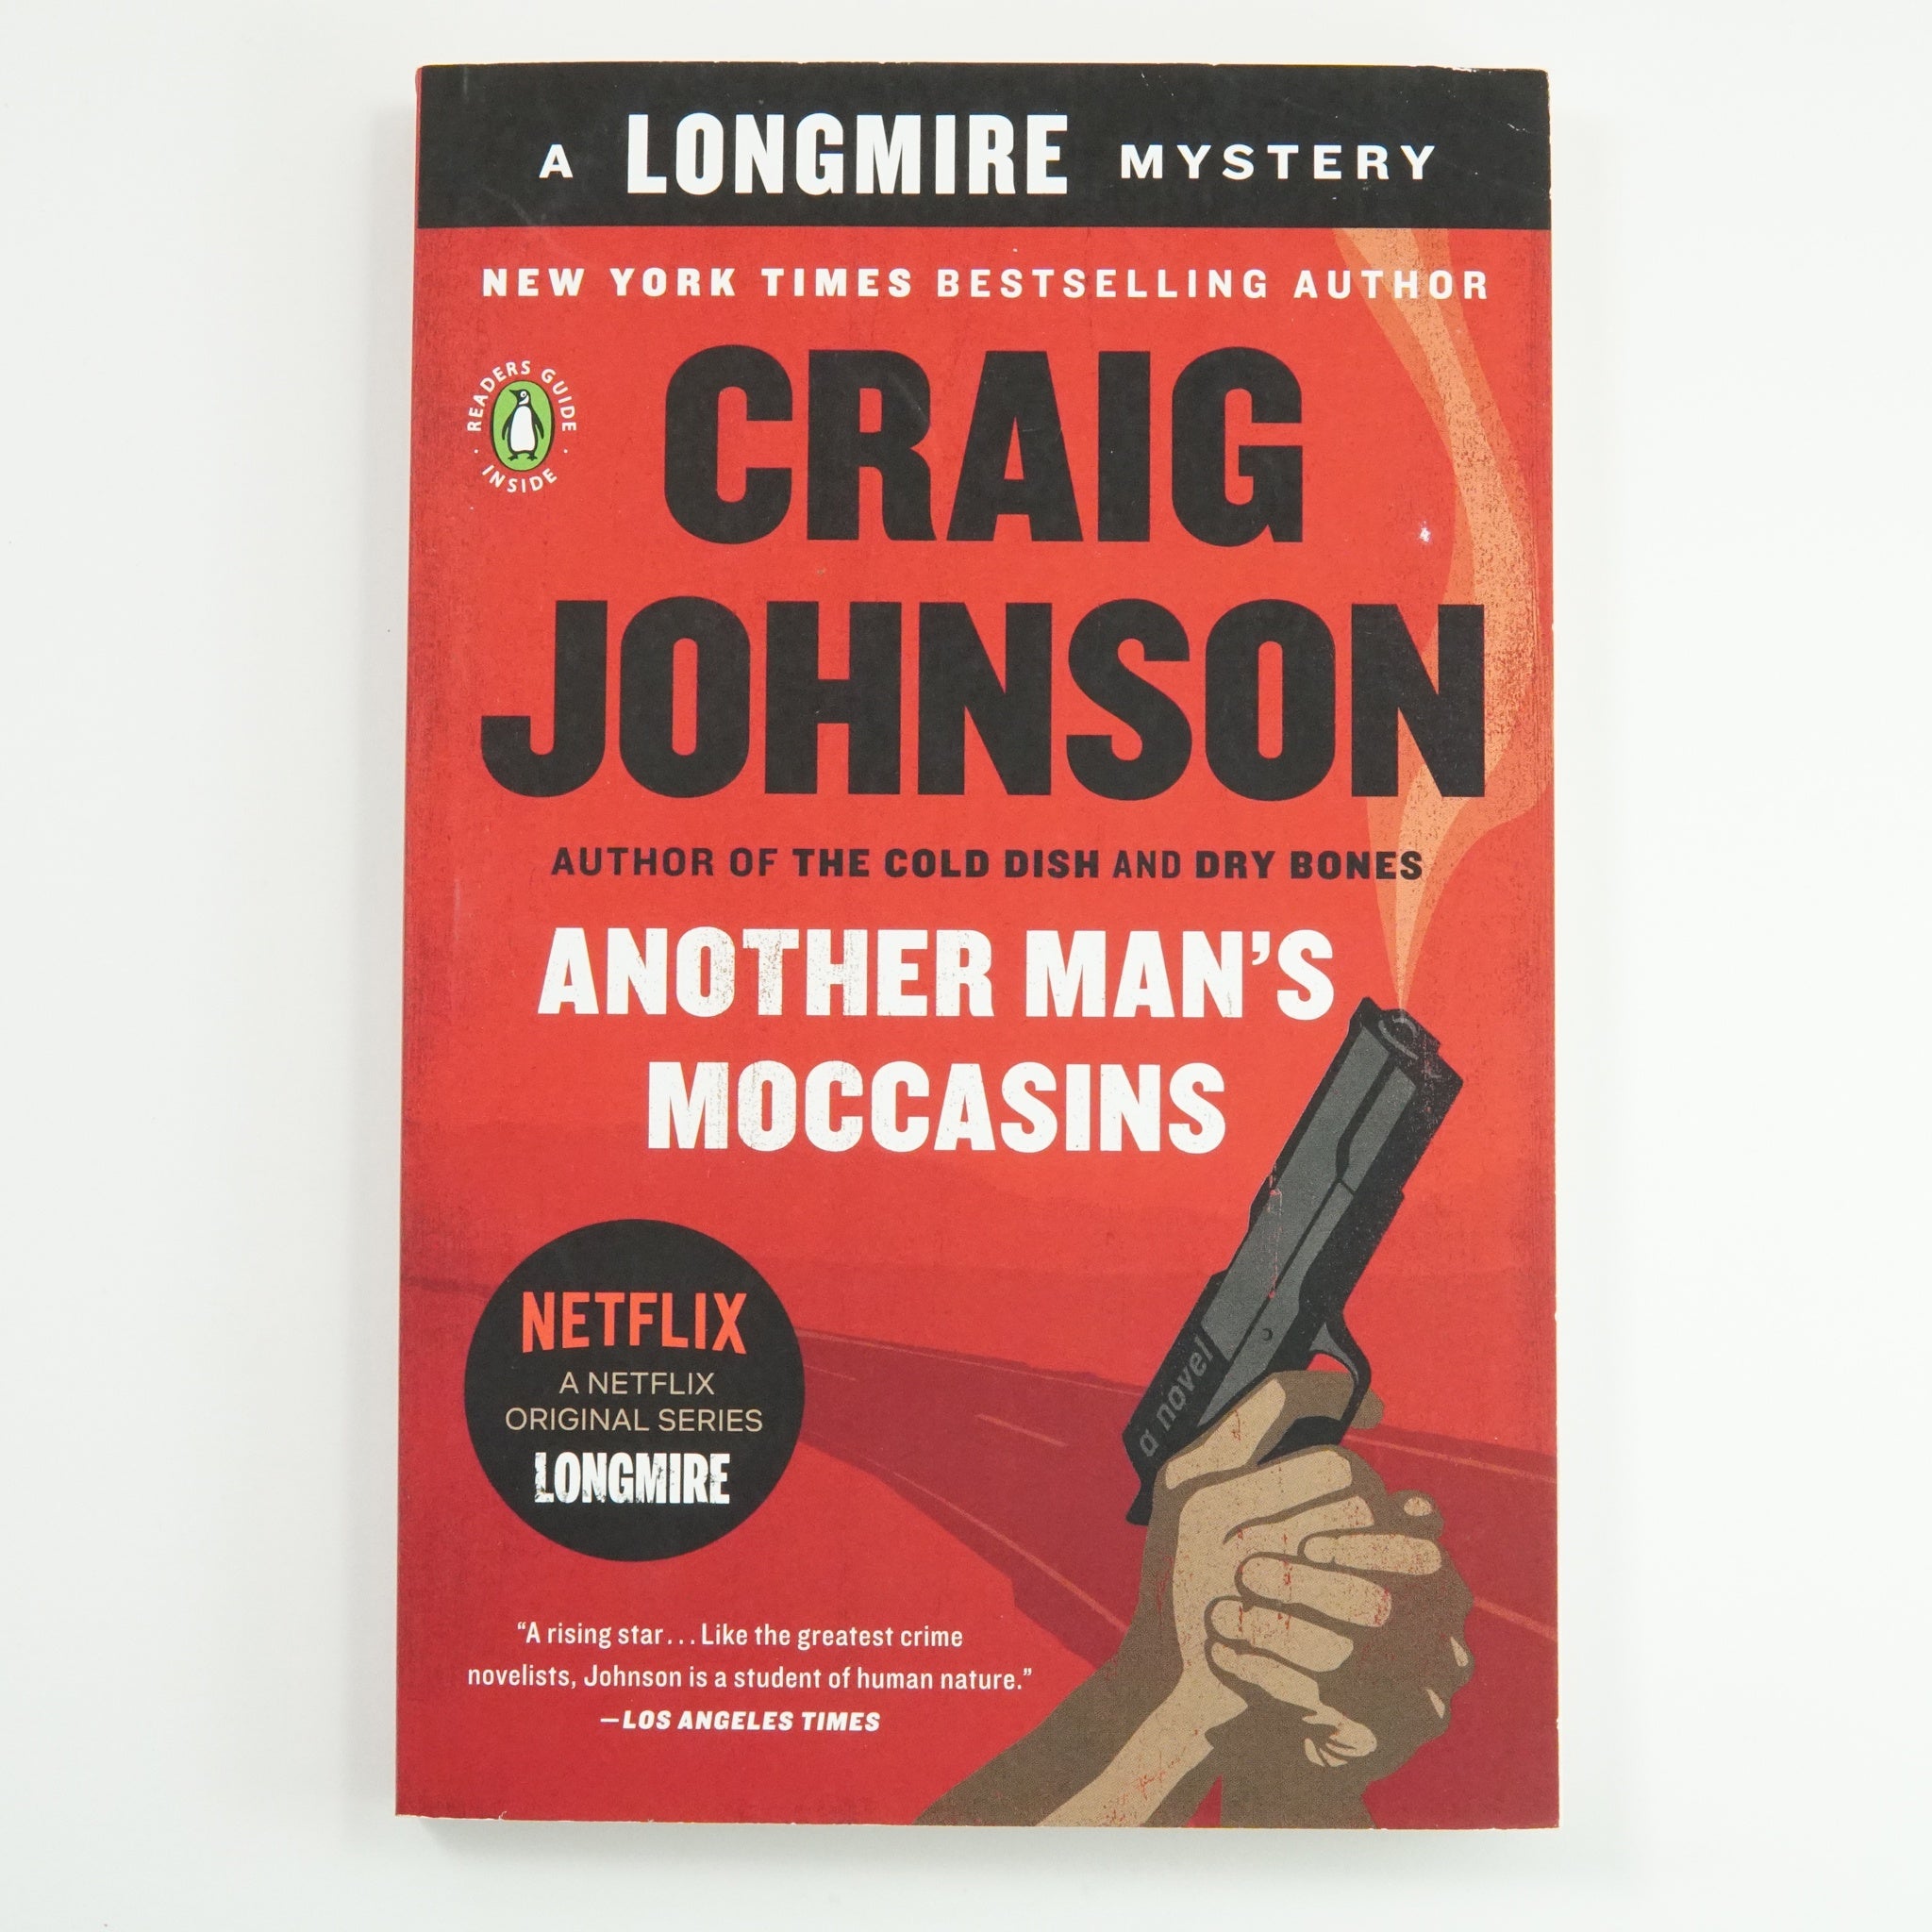 BK 5 ANOTHER MAN'S MOCCASINS BY CRAIG JOHNSON #21040674